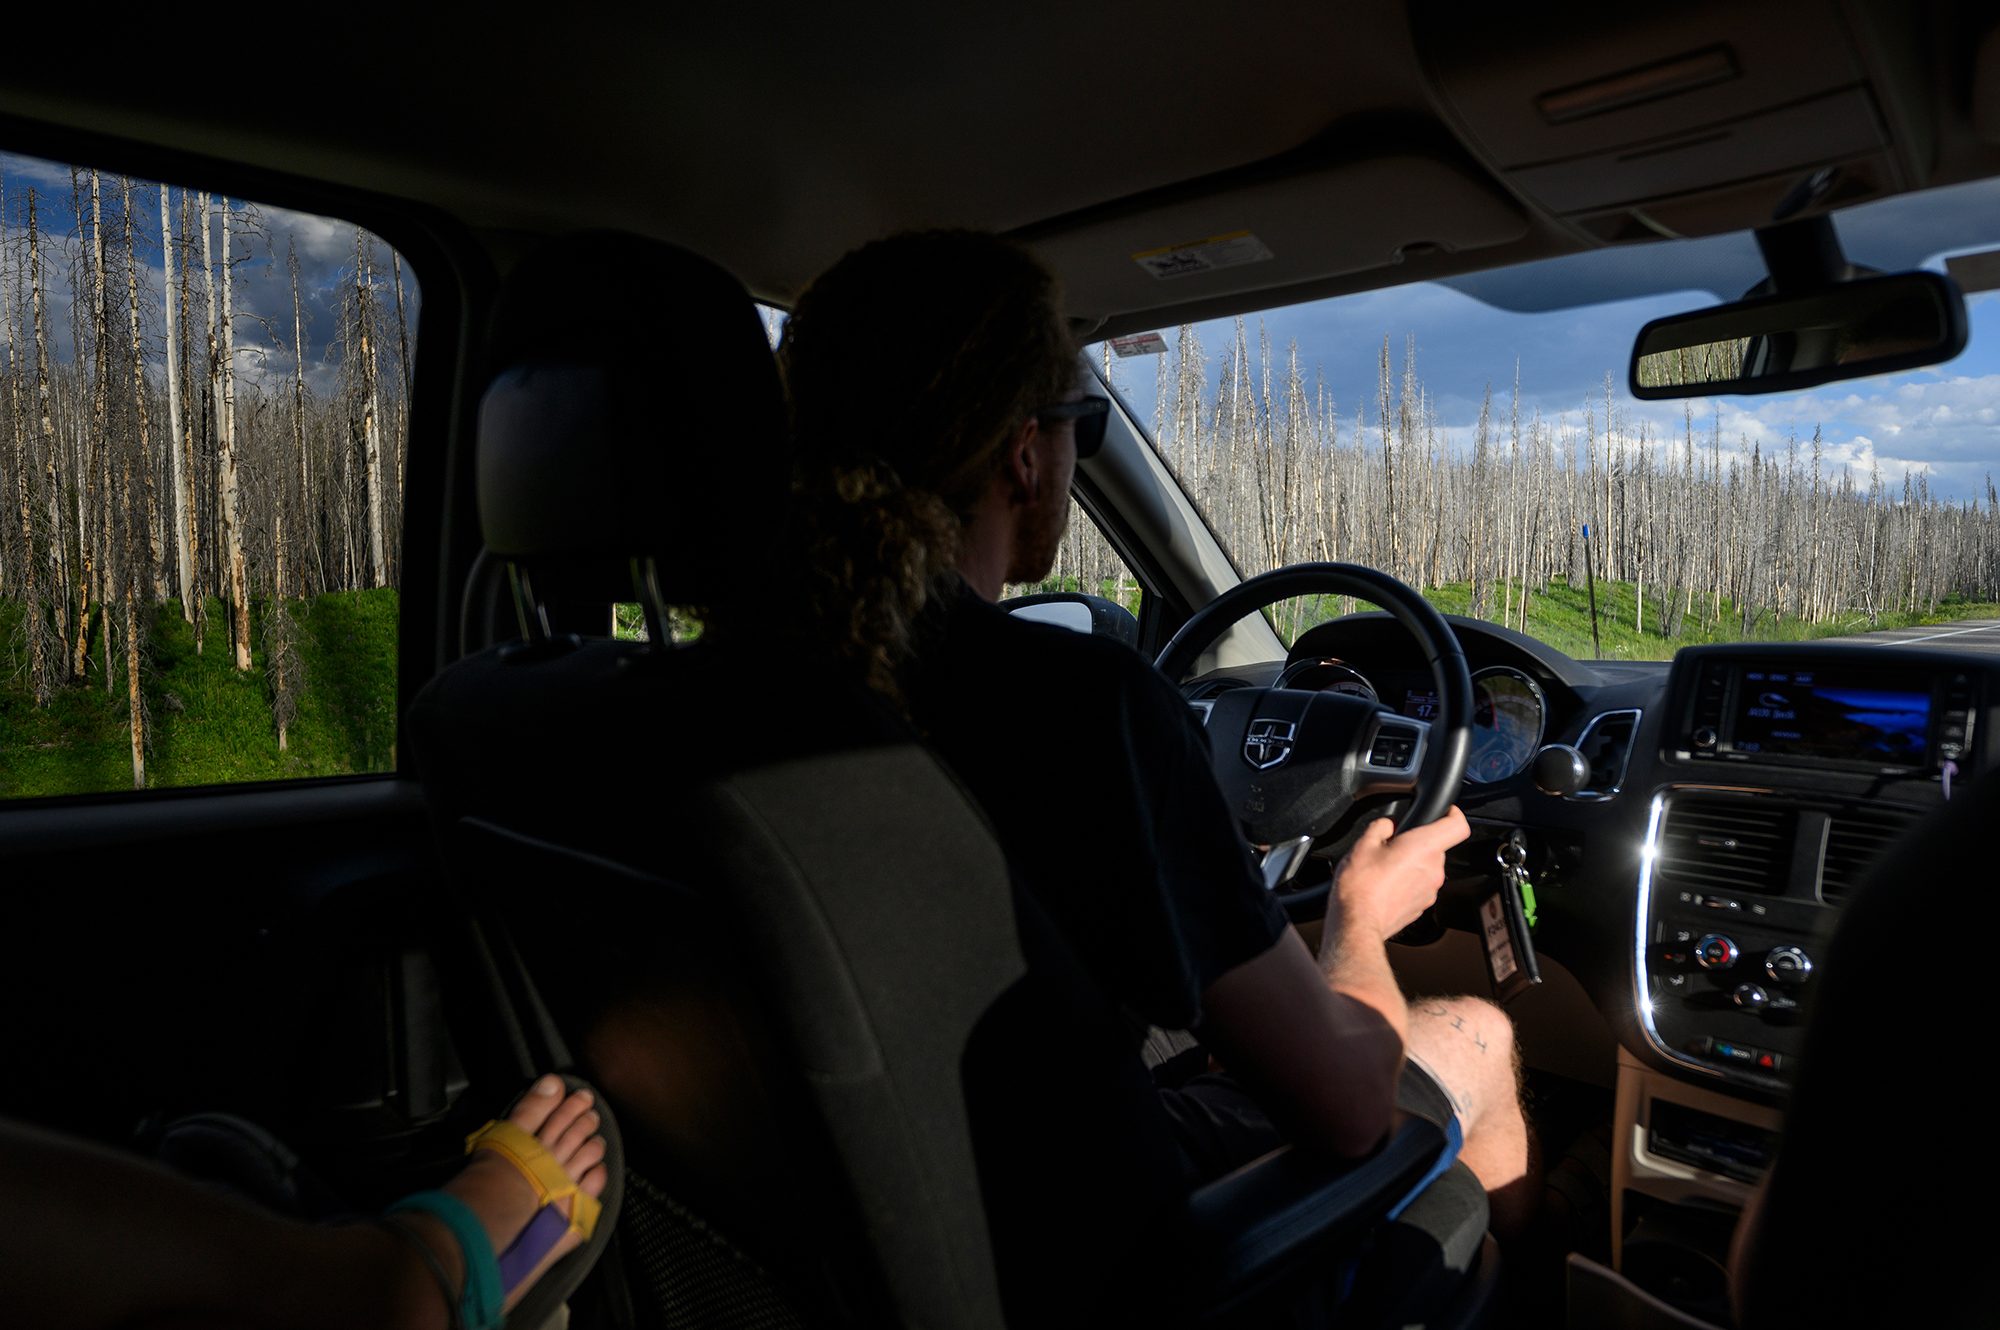 Lookin gout the windows from the back seat of the minivan the researchers drive, a stand of burned lodgepole pine are illuminated by evening sunlight. Timon drives the van and the edge of someone's sandal is catches a patch of sunlight in the car dark van.